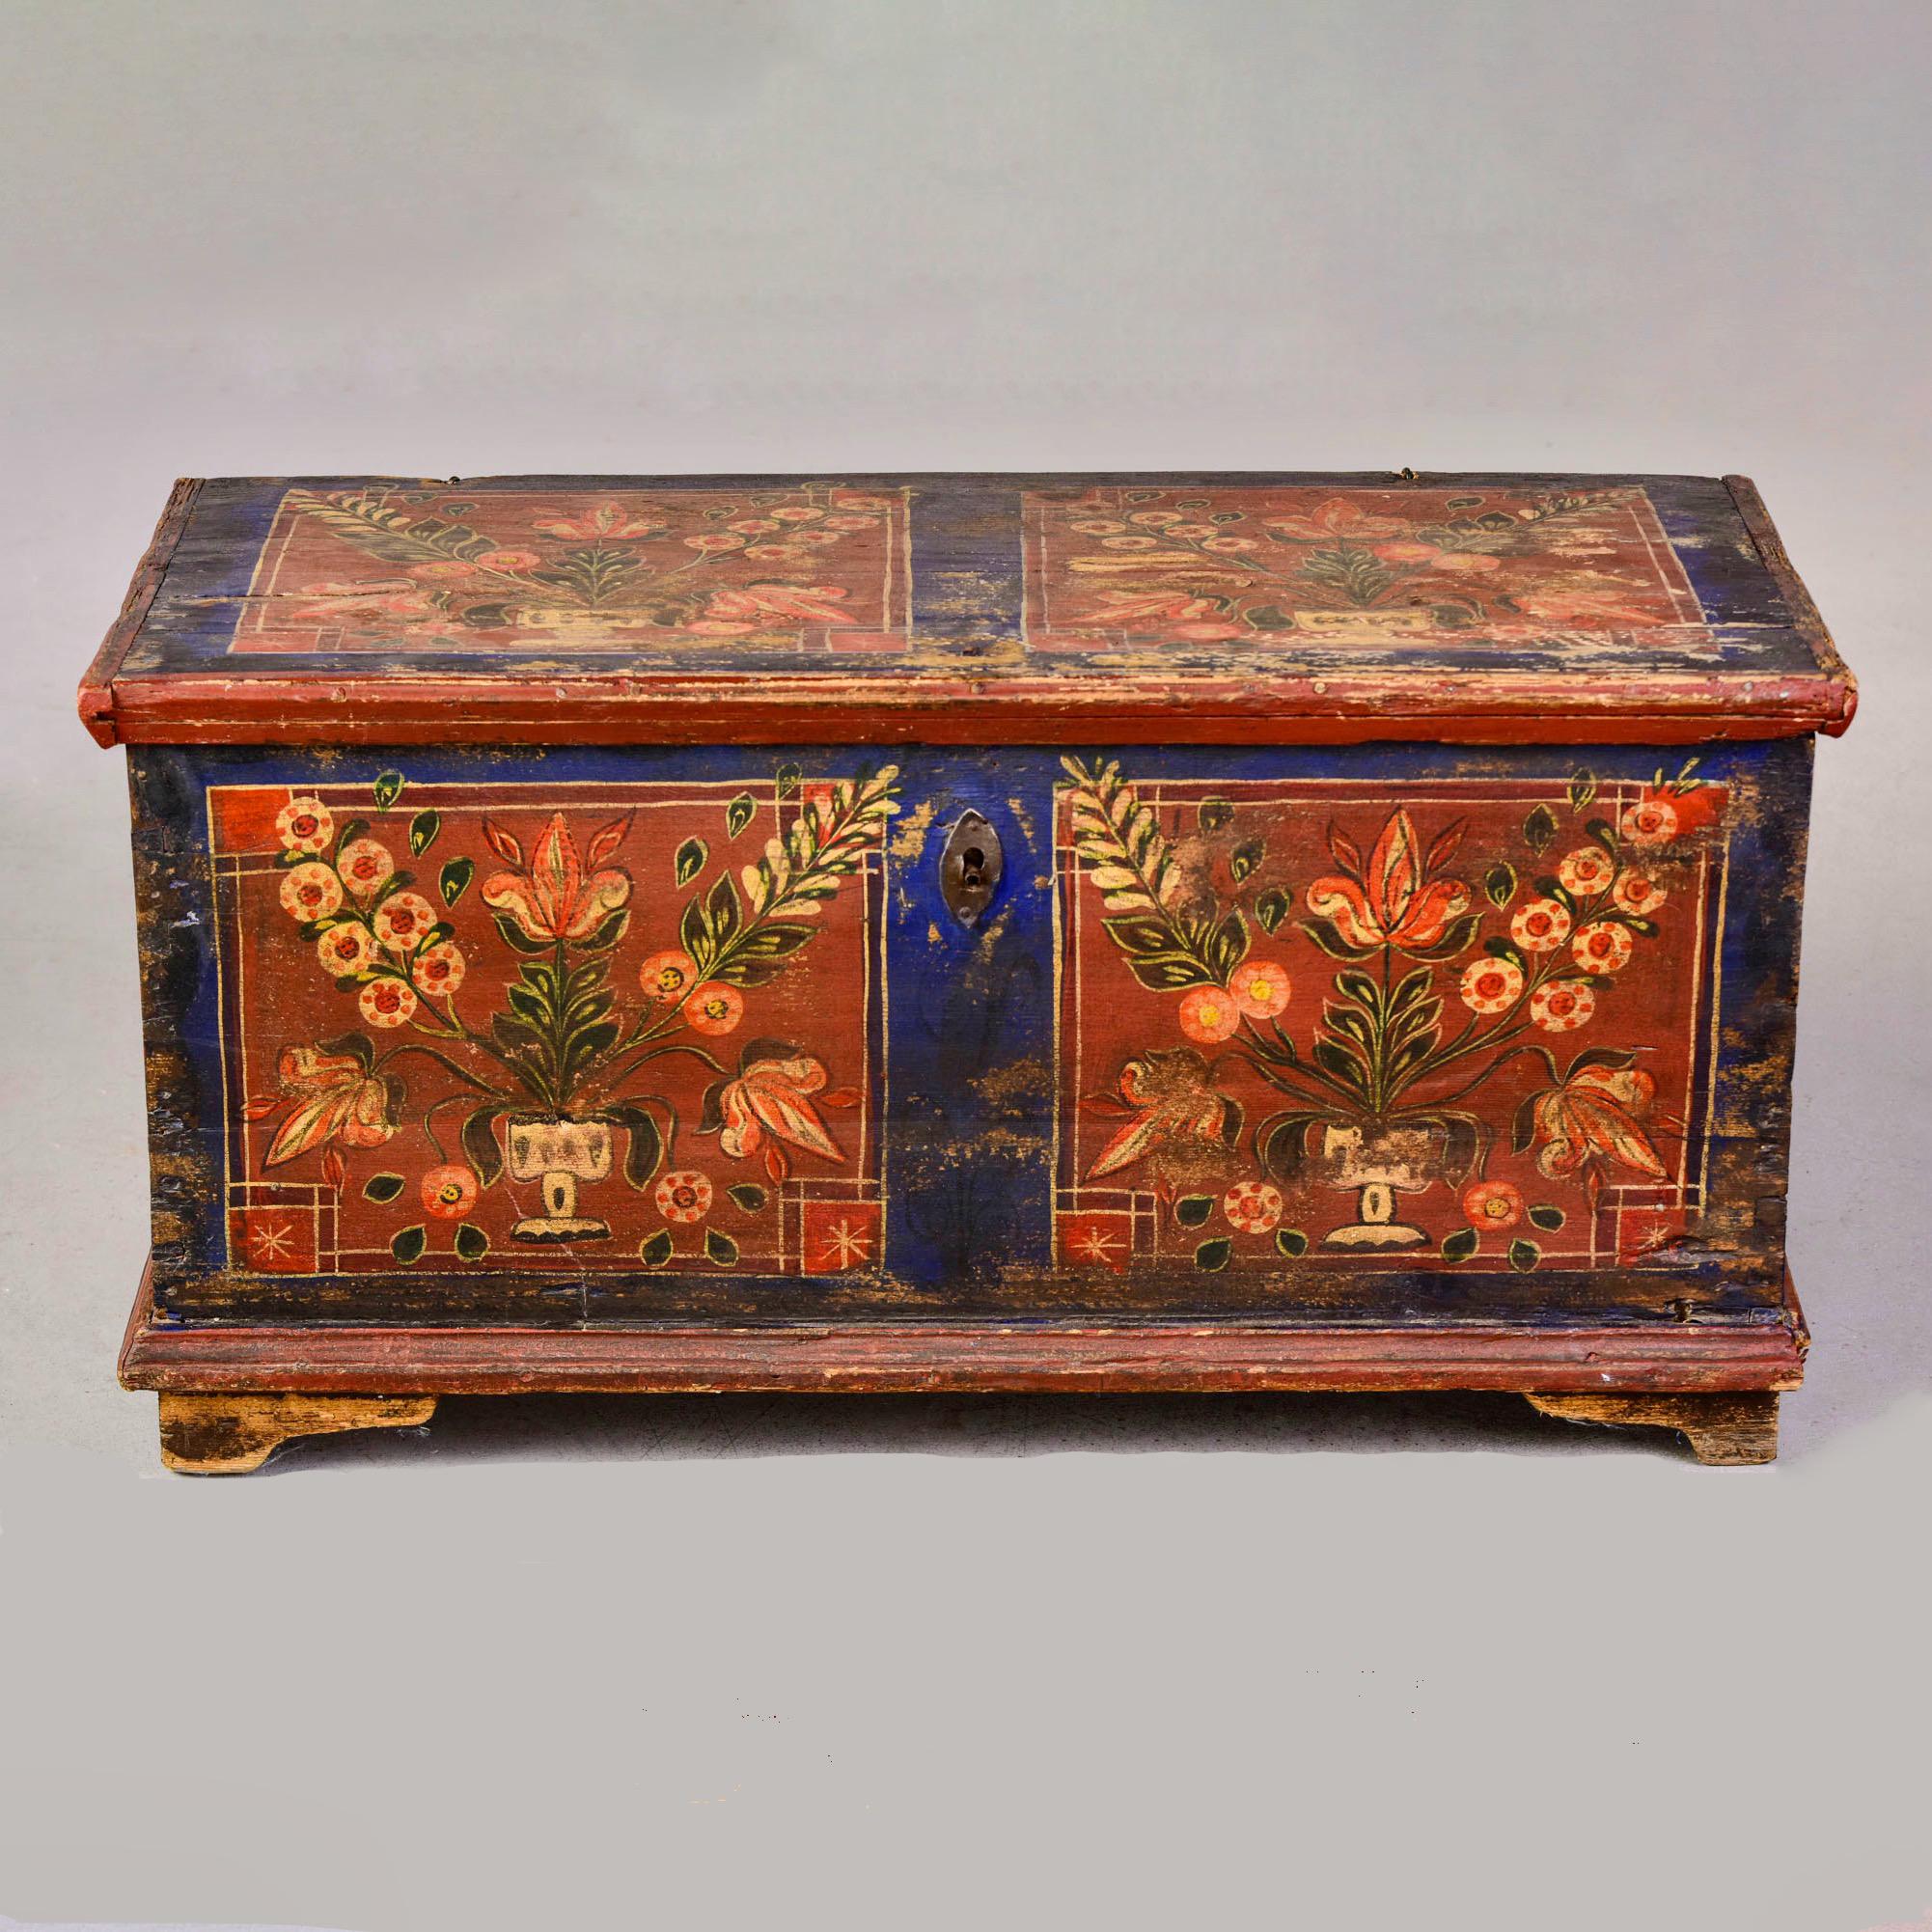 Circa 1865 Romanian painted wood trunk. Great color and design with floral motif and painted panels on top, front and sides. Honest wear and fading. Painted date inside of lid is 1865. Rustic hinge hardware, dovetail construction, small internal